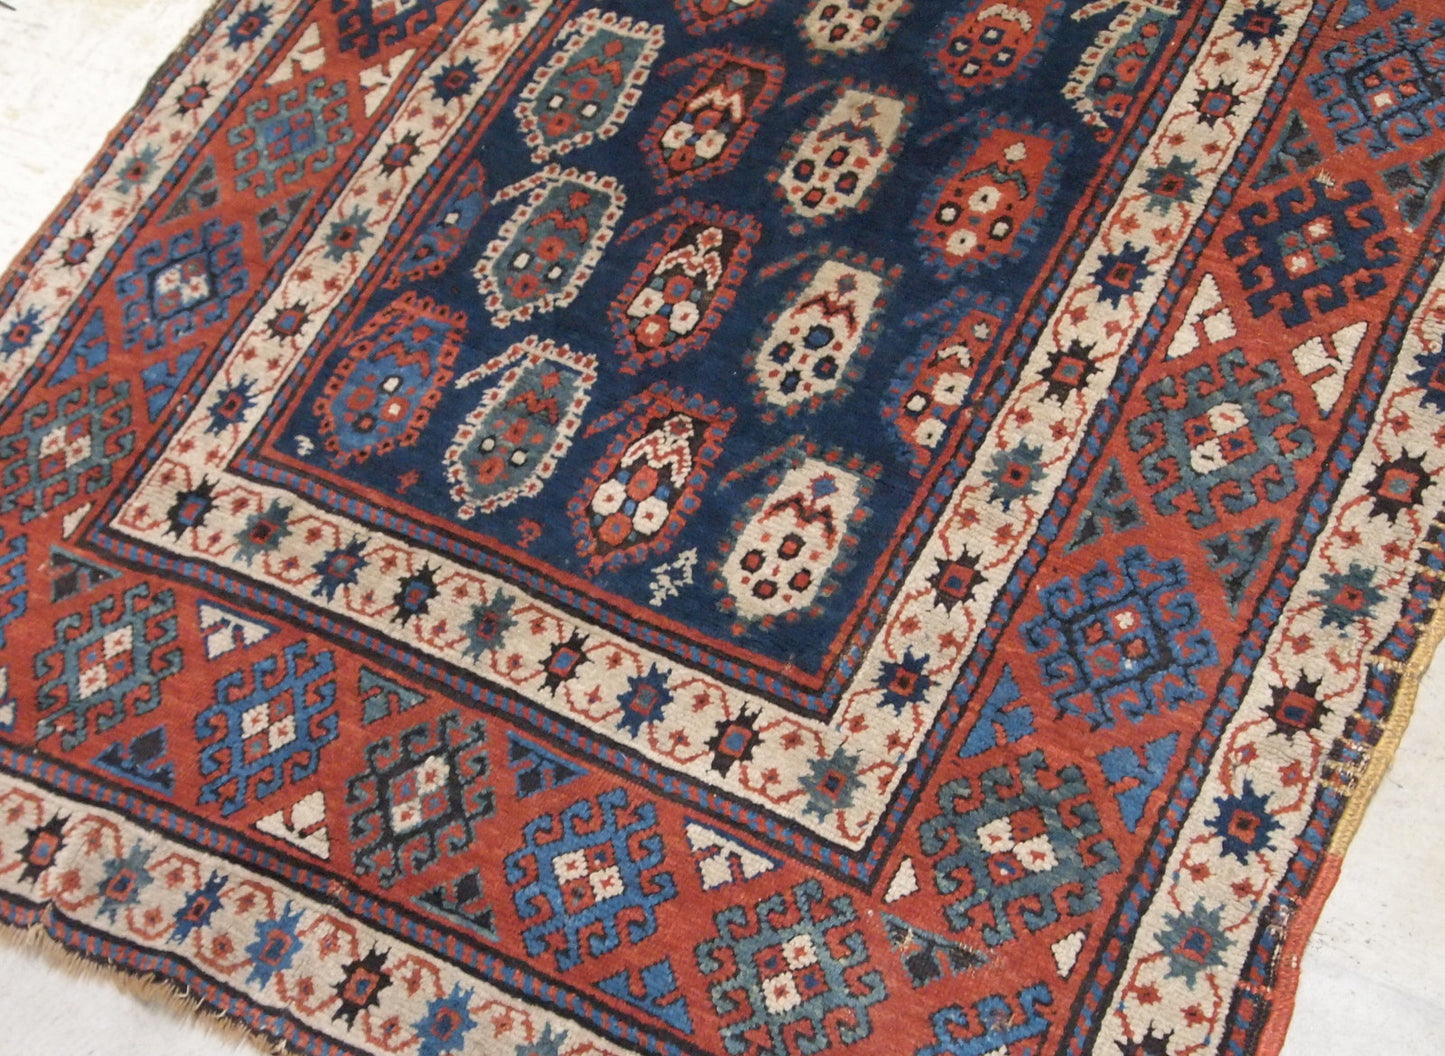 Handmade antique Caucasian Kazak rug in original good condition. This rug is from the end of 19th century made in unusual design.